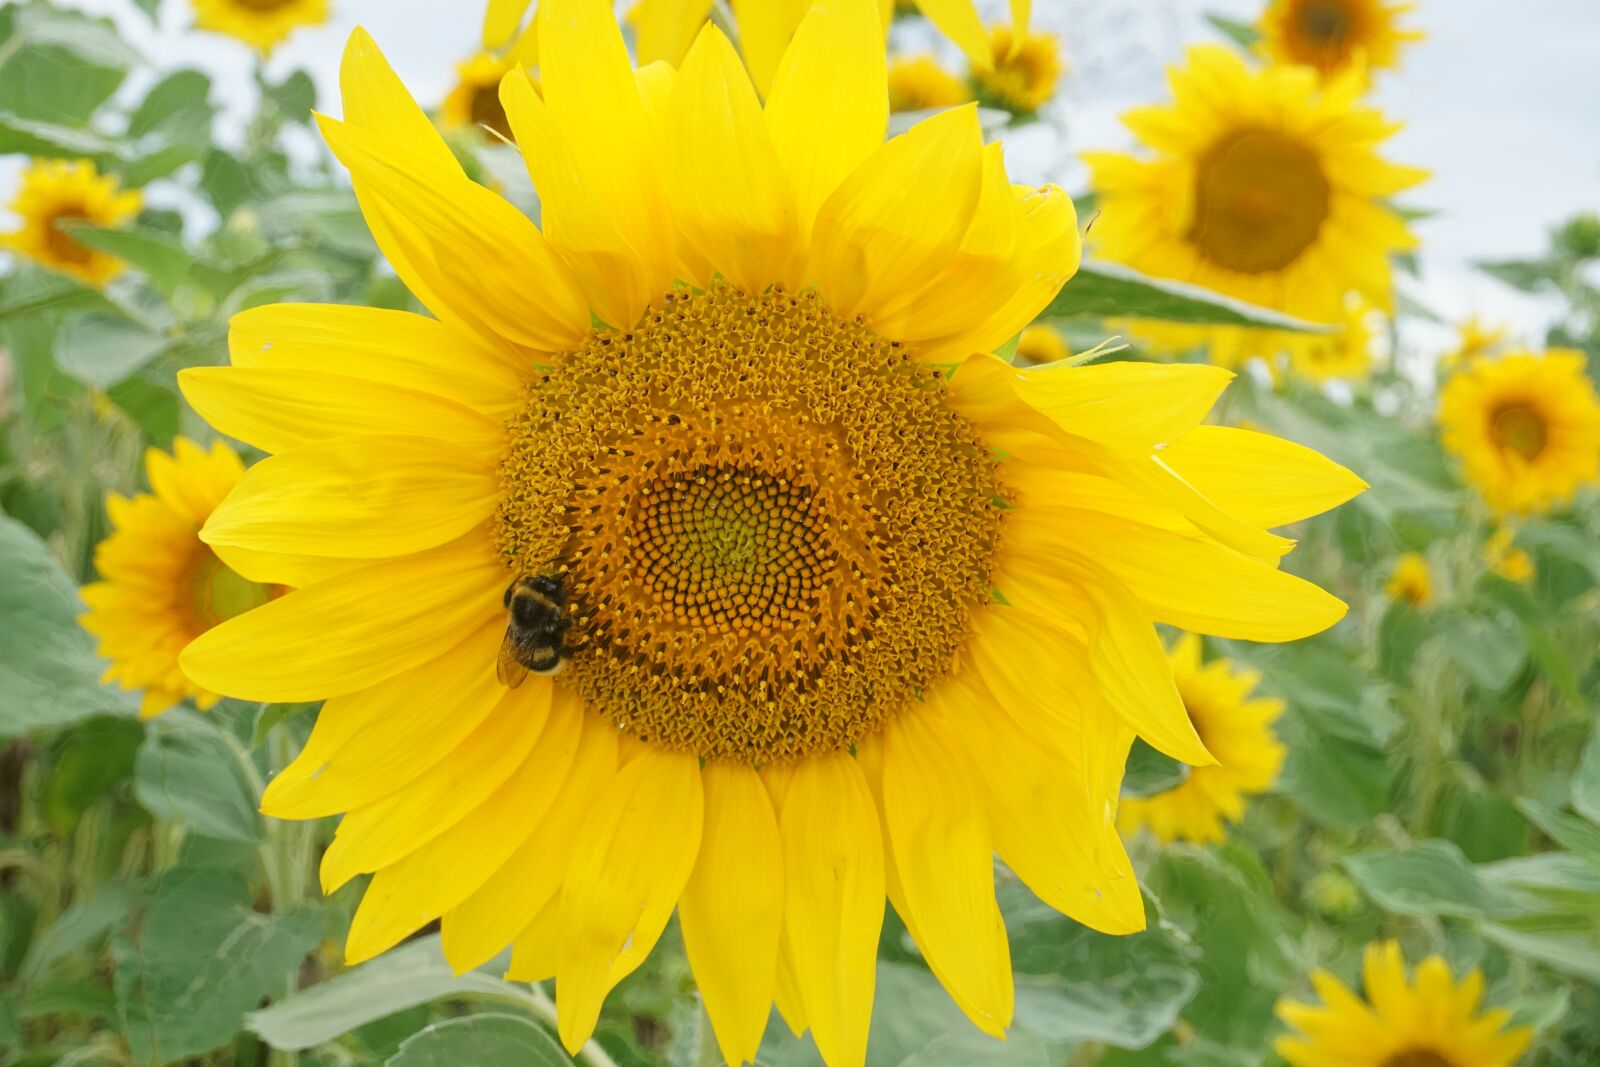 Sony a5100 sample photo. Sunflower, bee, yellow photography